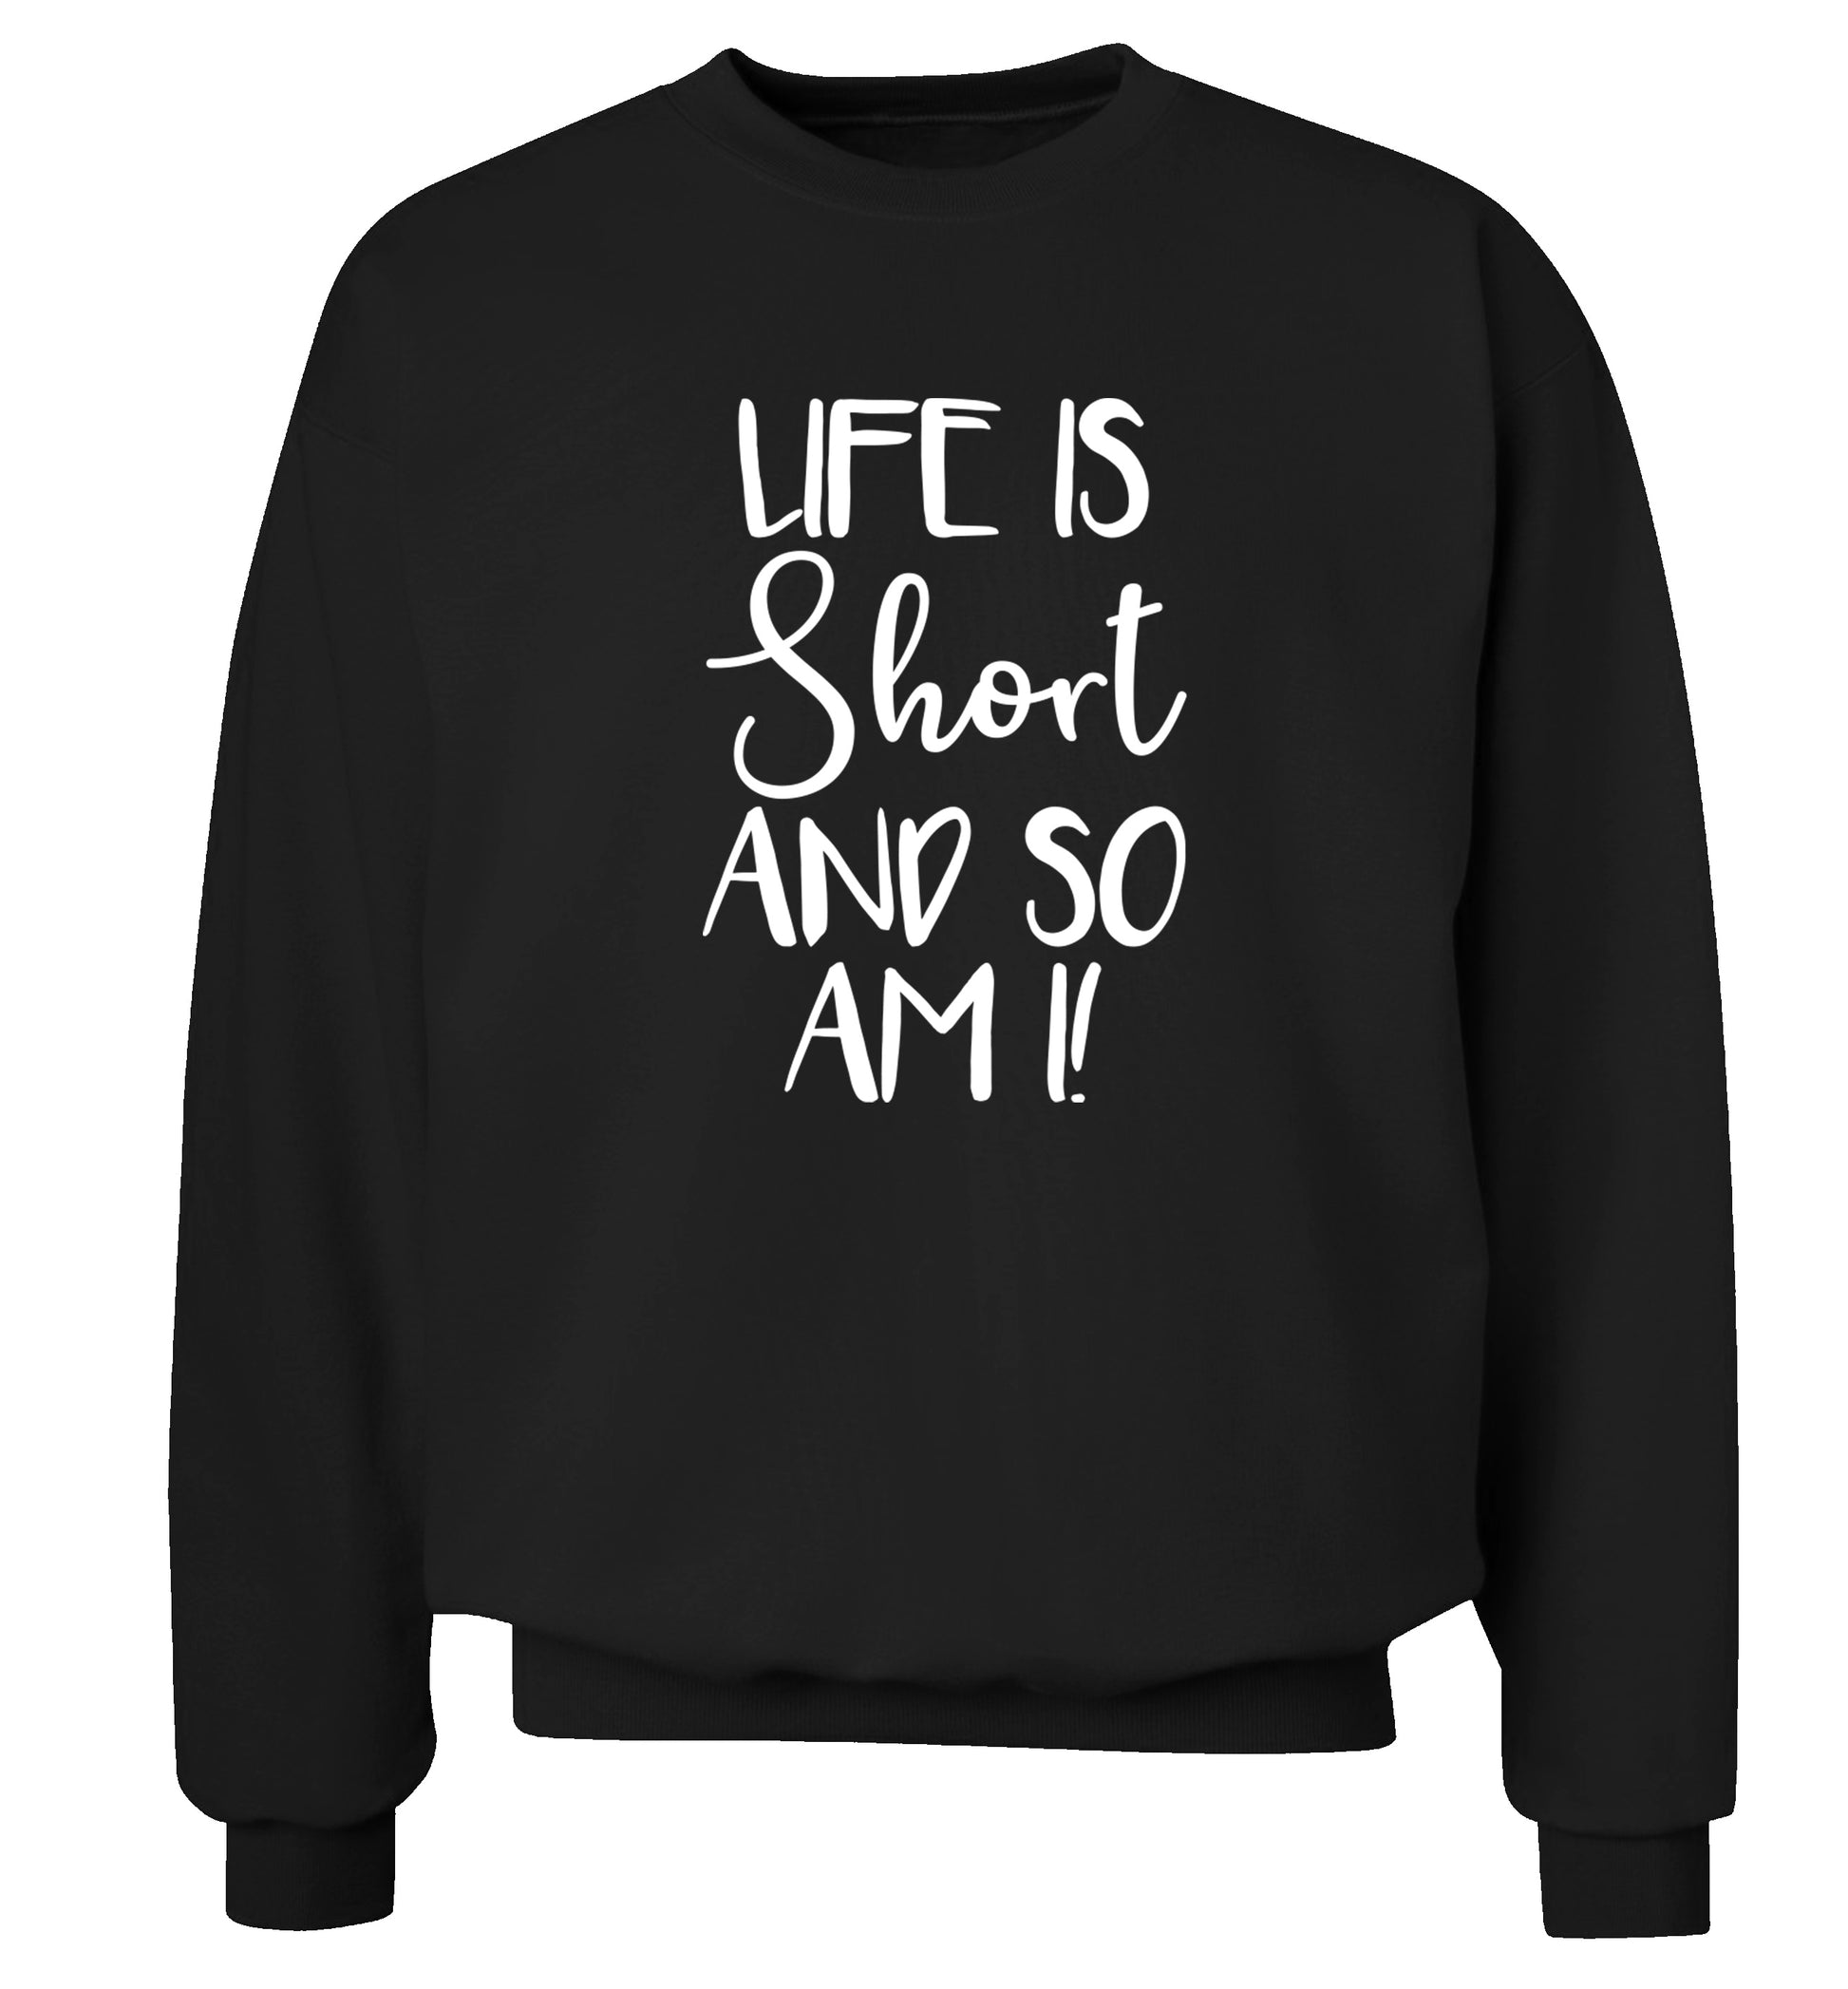 Life is short and so am I! Adult's unisex black Sweater 2XL